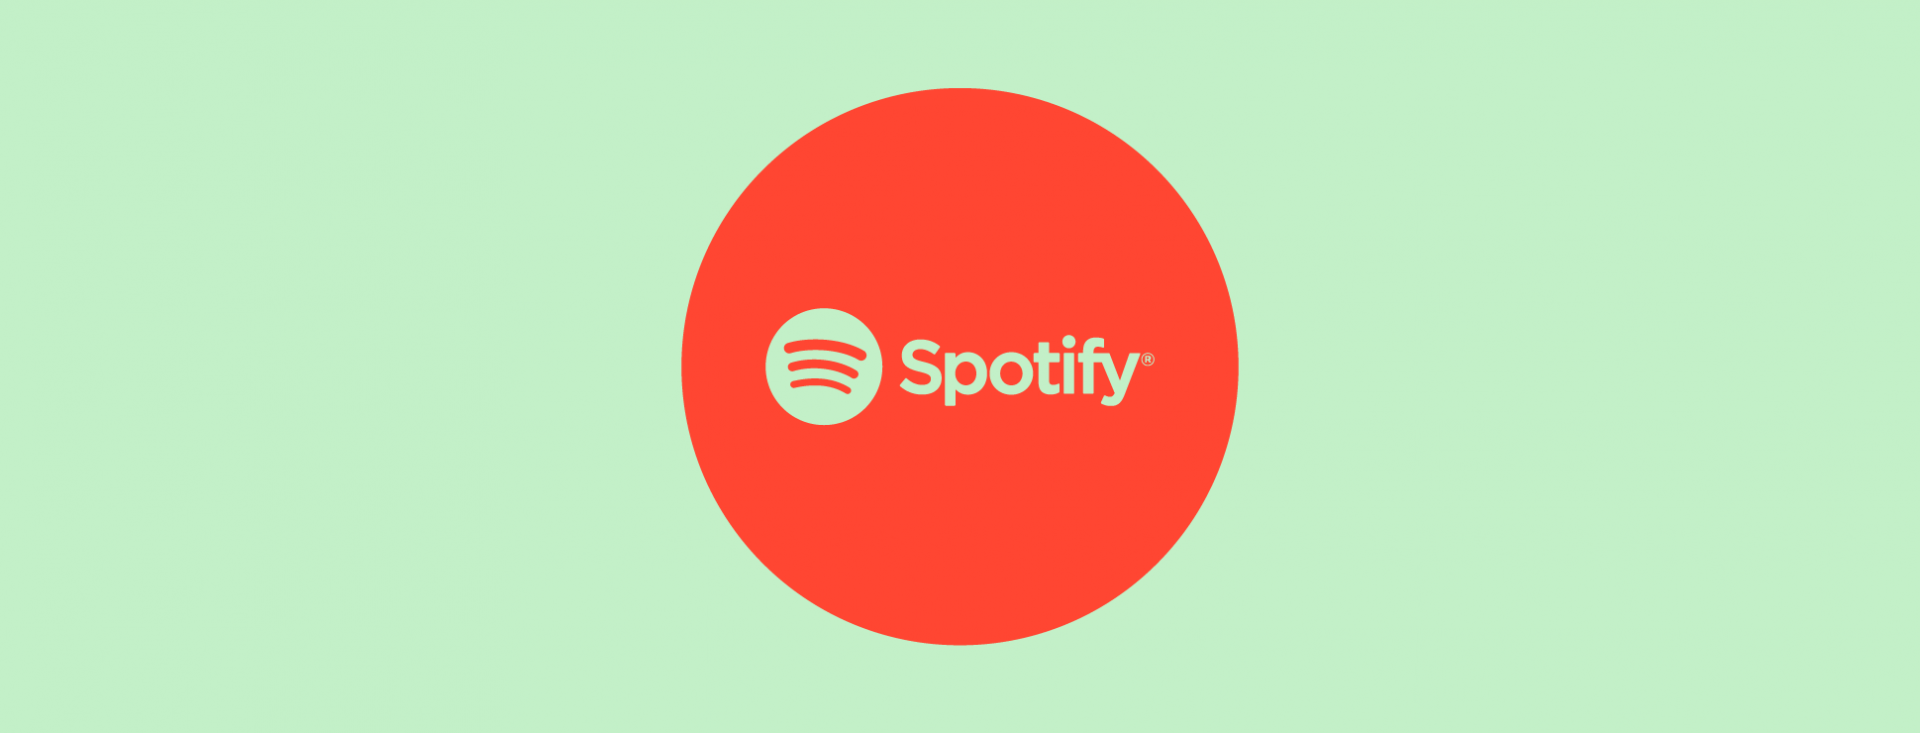 Spotify bringing access to 500,000 audiobooks